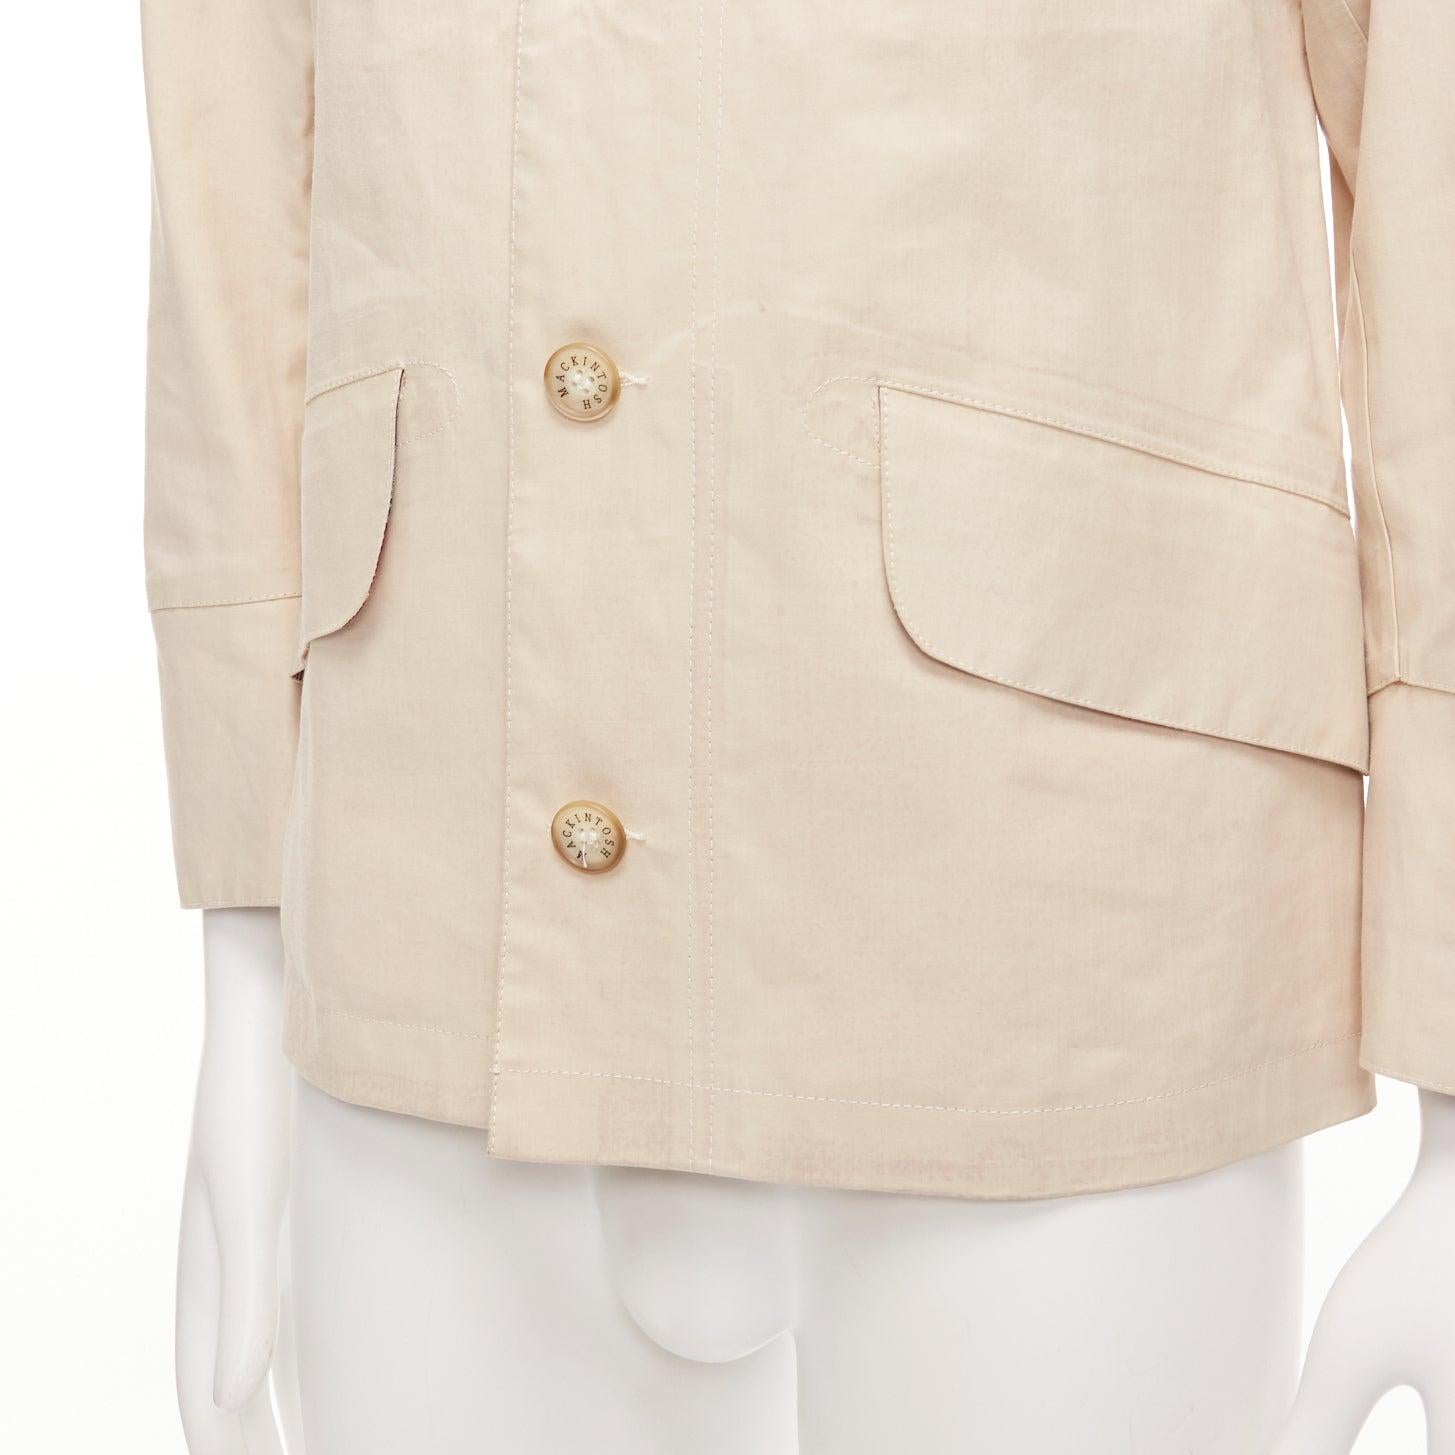 JUNYA WATANABE MACKINTOSH 2010 beige coated cotton logo button jacket XS
Reference: JSLE/A00115
Brand: Junya Watanabe
Collection: MACKINTOSH 2010
Material: Cotton
Color: Beige
Pattern: Solid
Closure: Button
Lining: Multicolour Fabric
Extra Details: